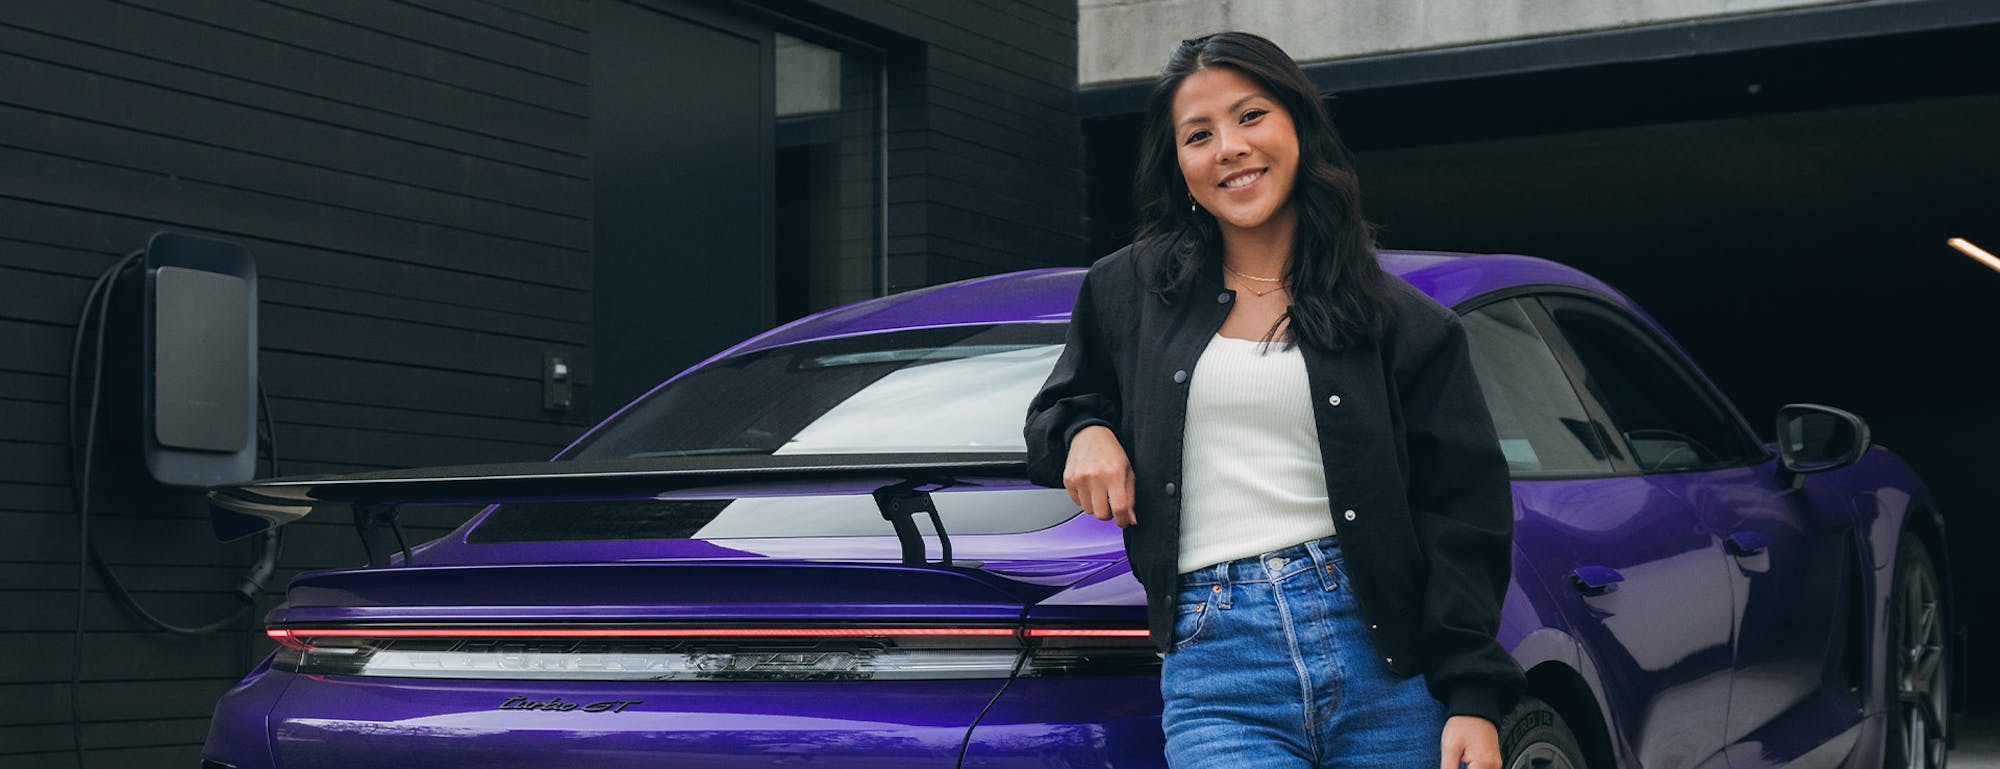 Smiling woman posing with purple Taycan Turbo GT in driveway